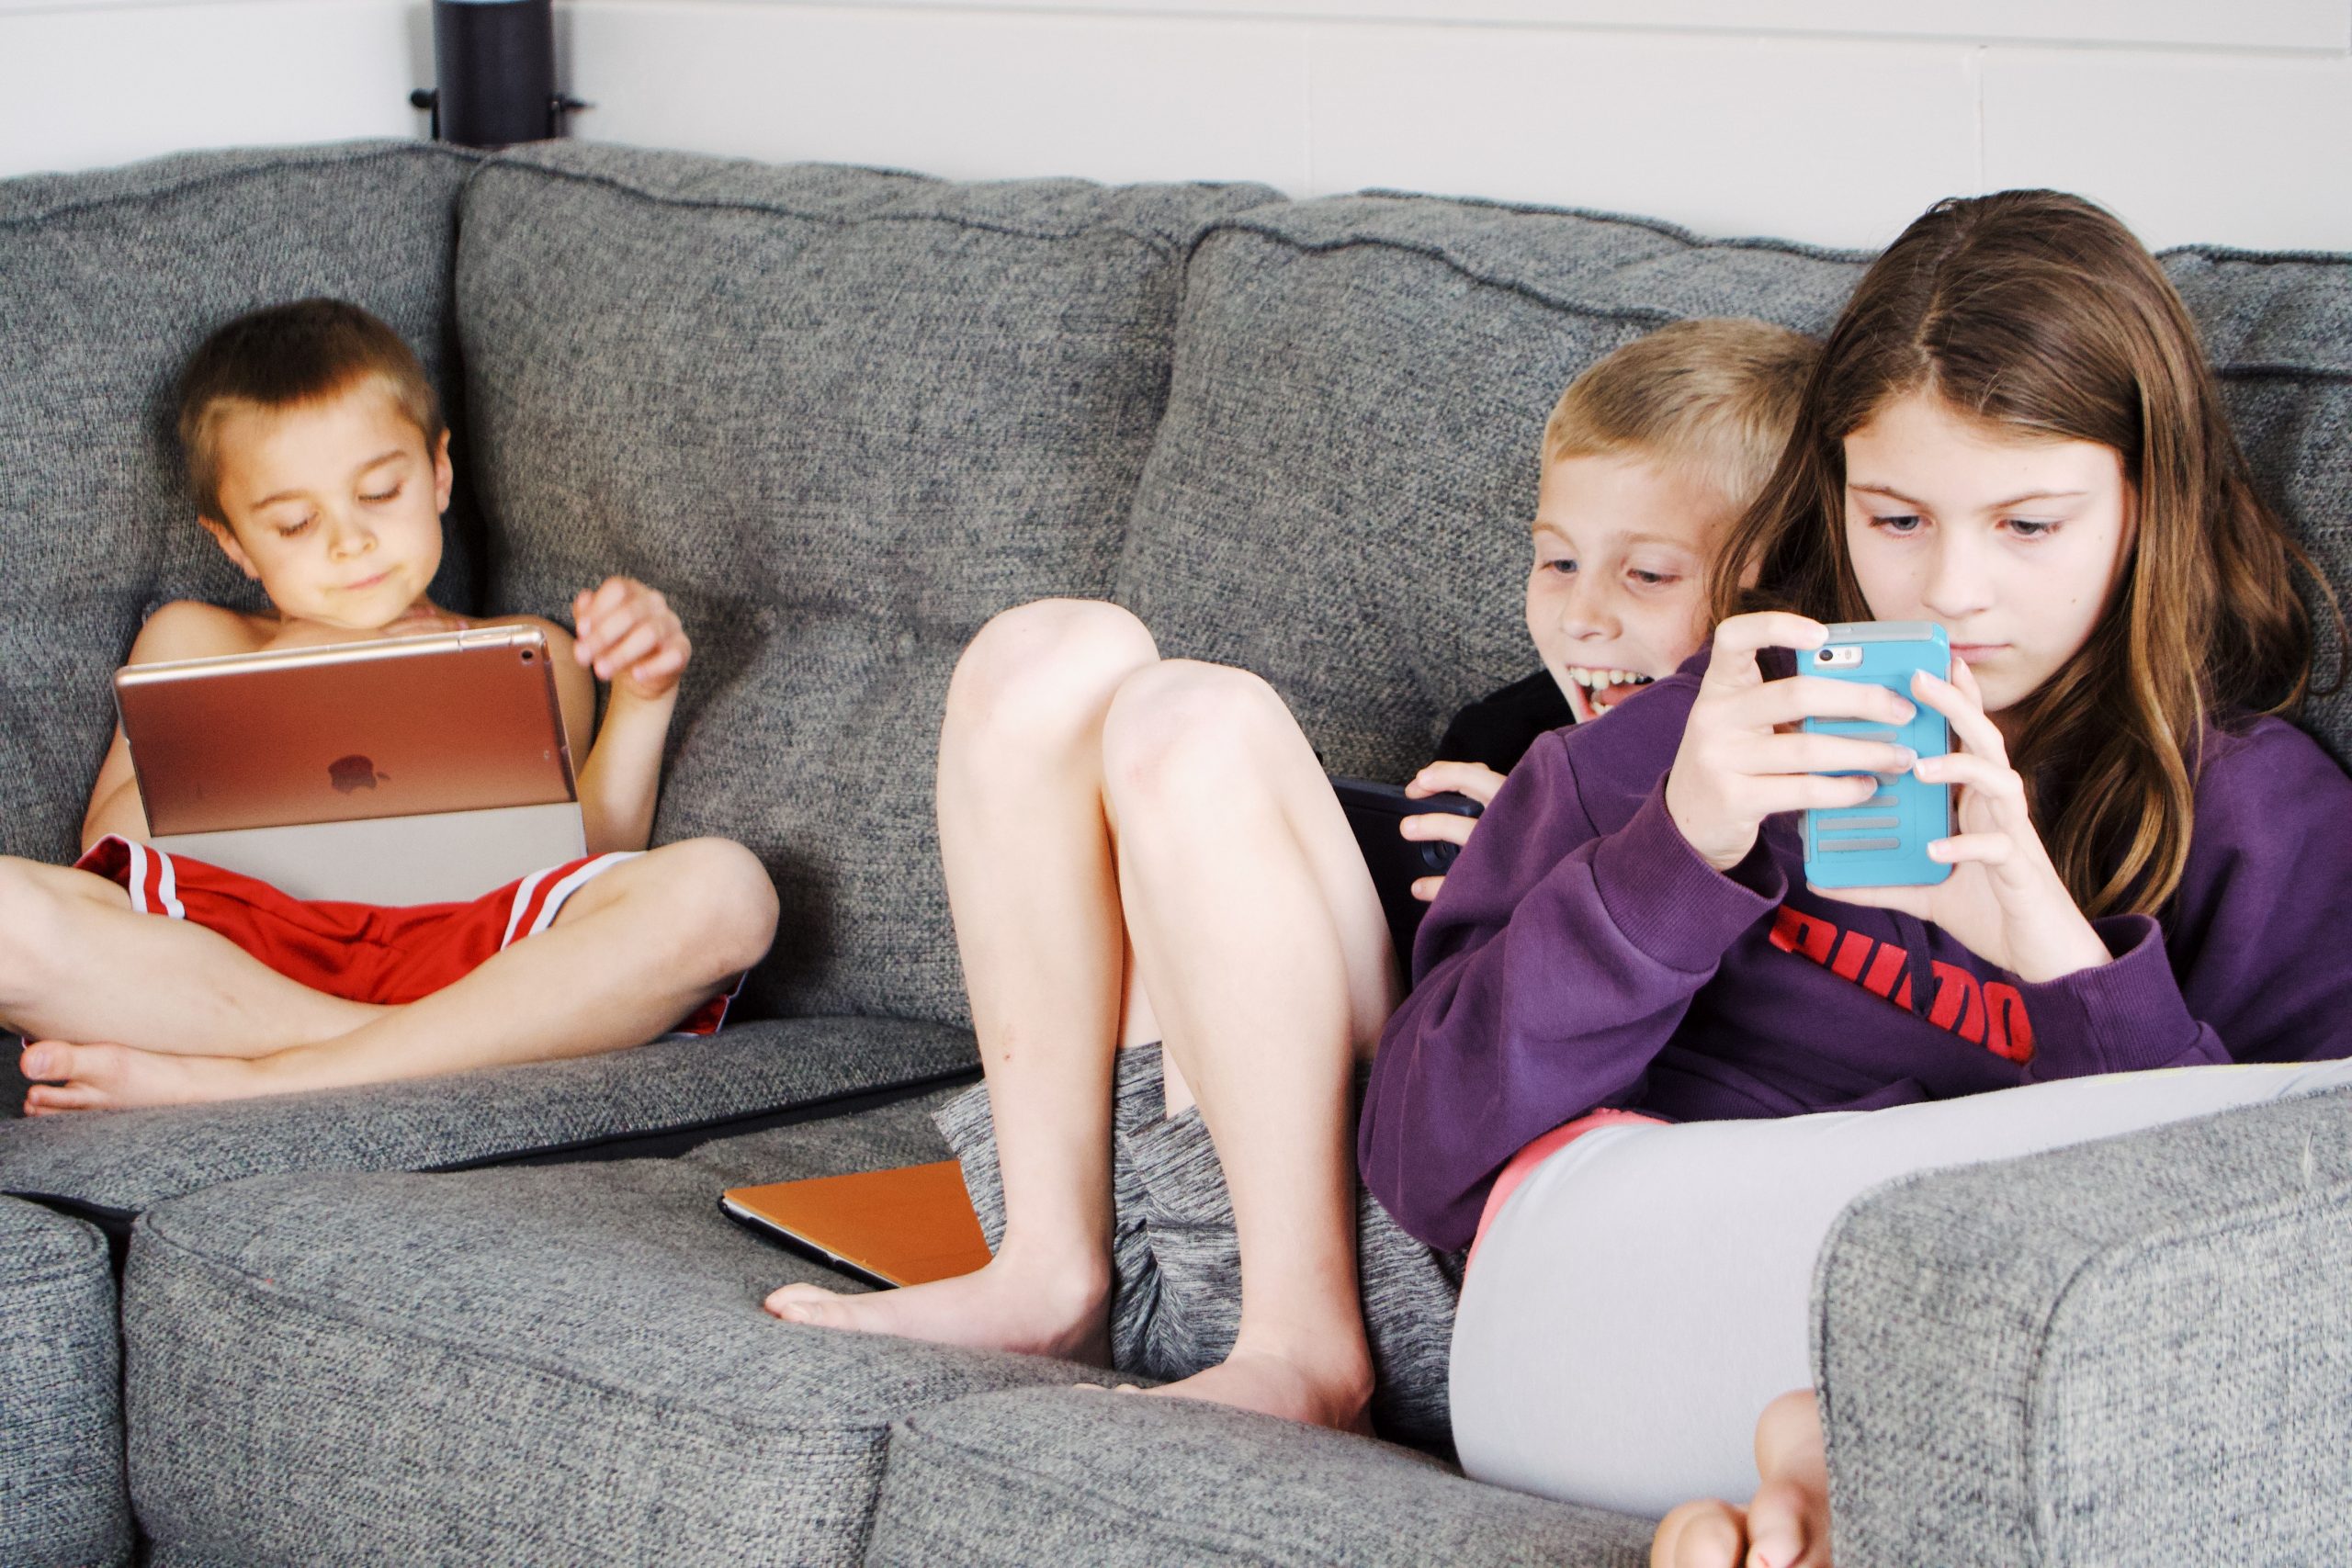 Mobile Games, Lootboxes, Kids playing on their phones on a couch